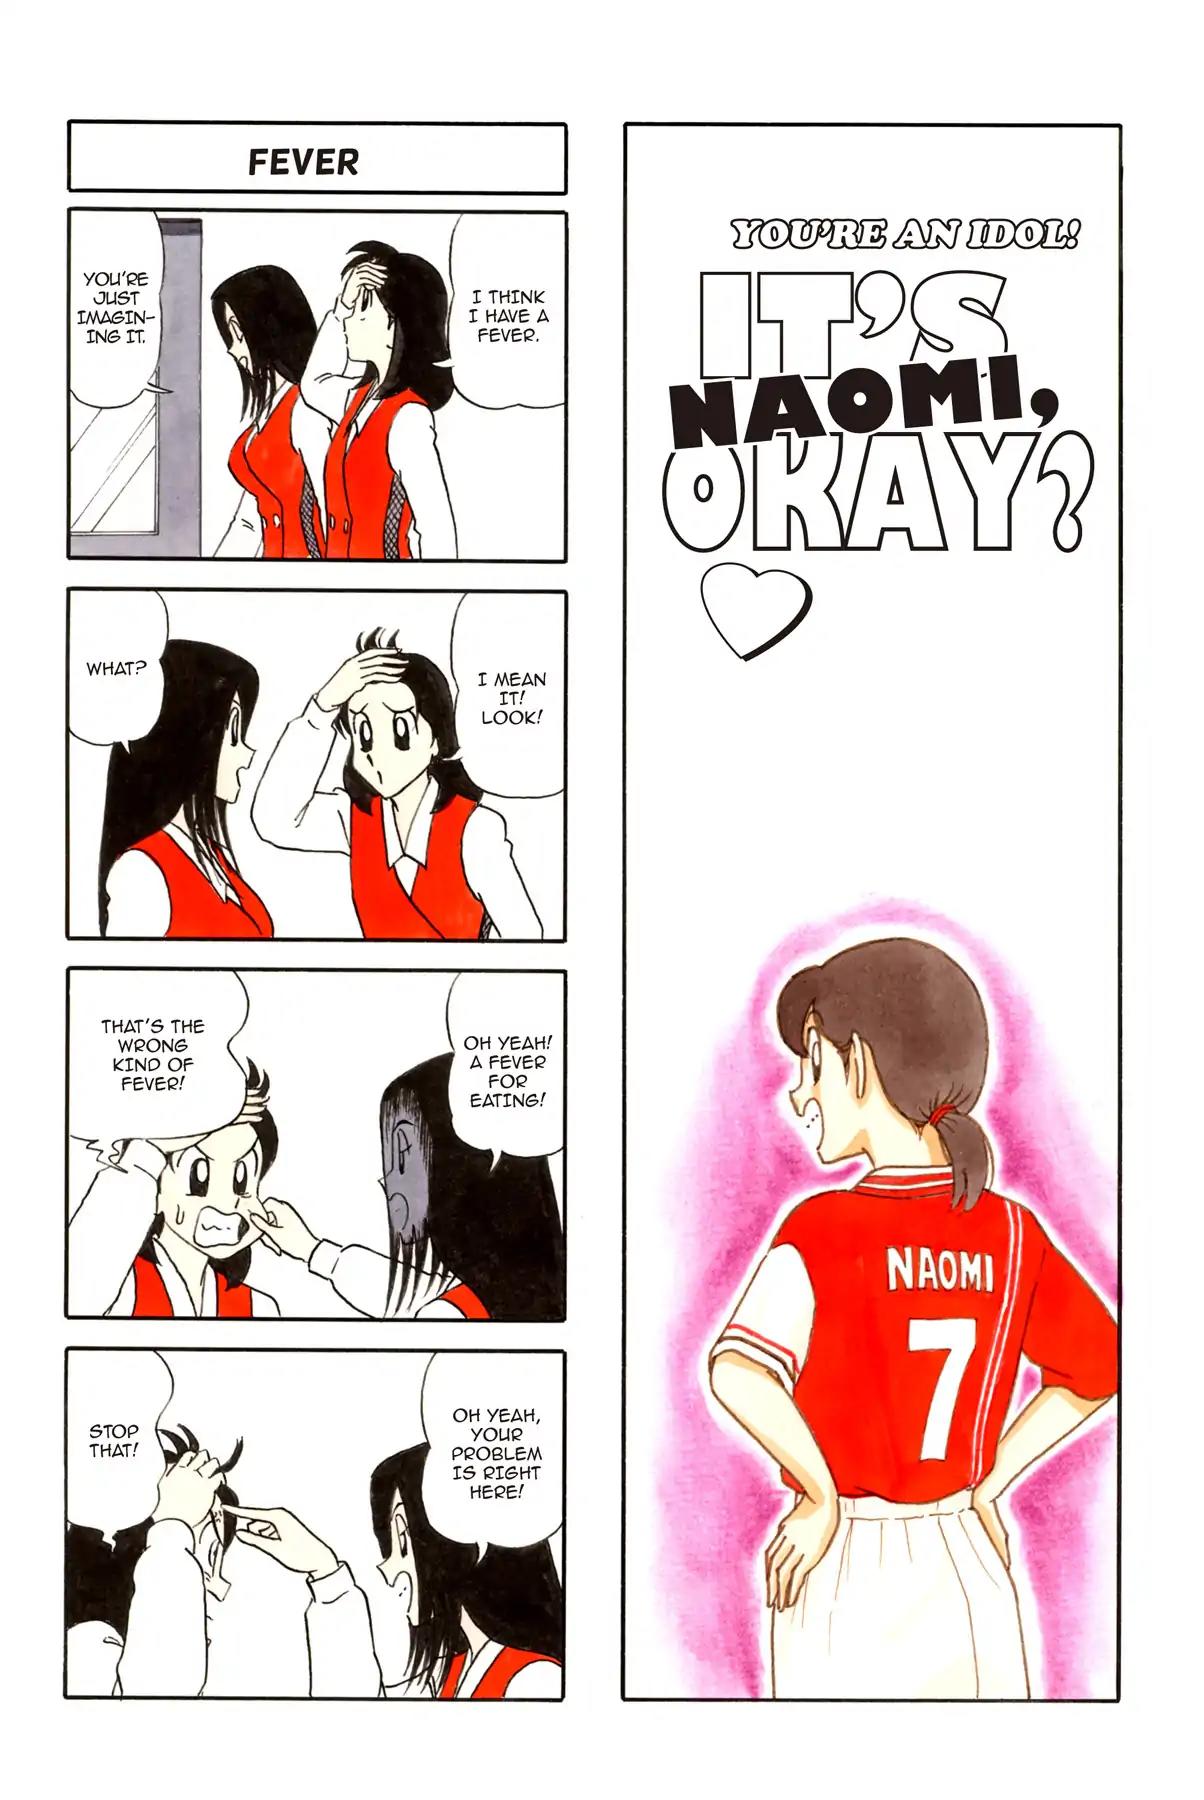 It's Naomi, Okay? After 16 Vol 1 Chapter 5